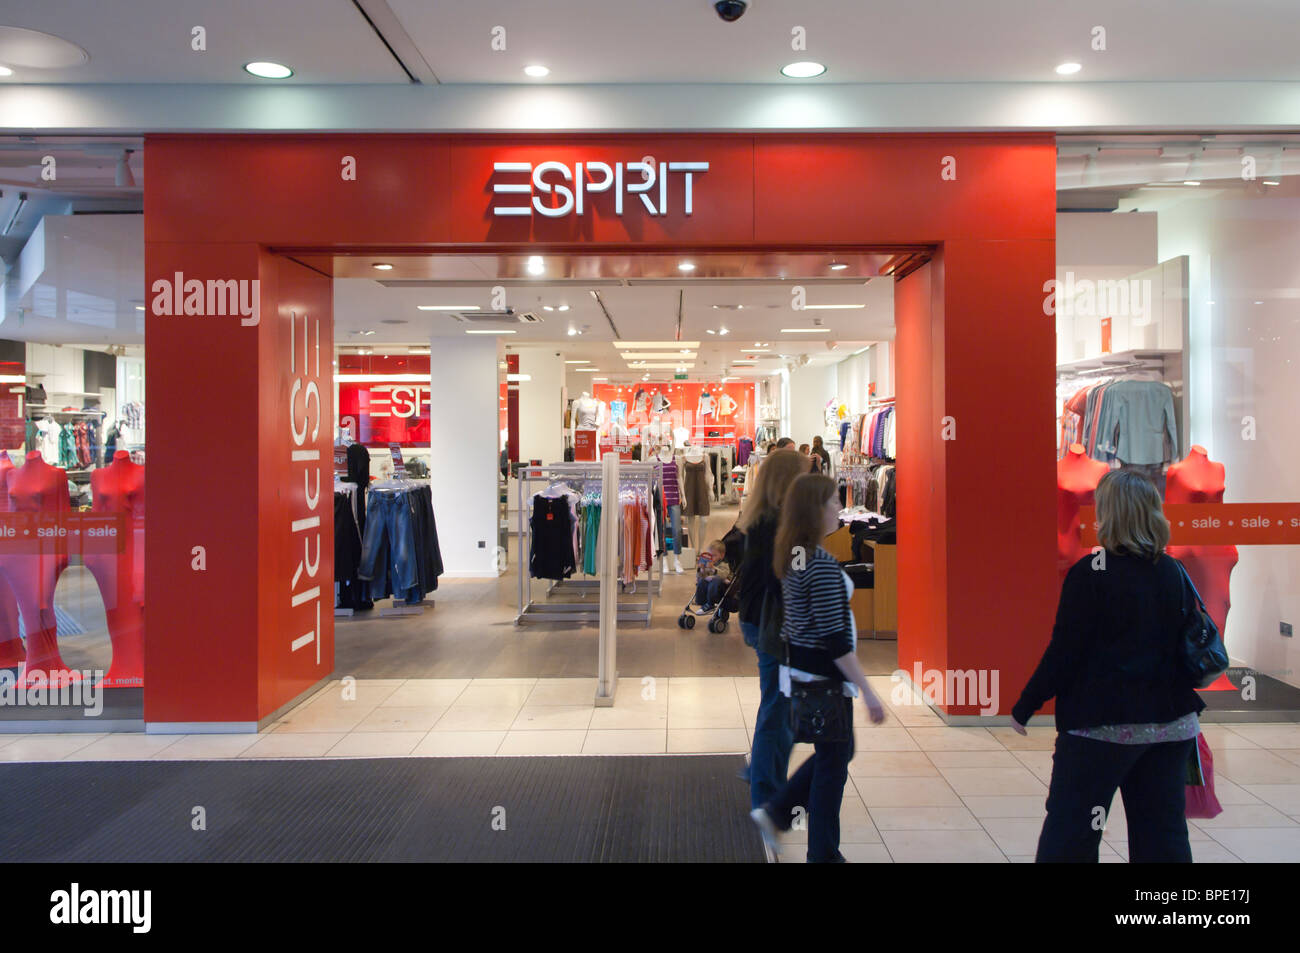 Esprit Shop High Resolution Stock Photography and Images - Alamy